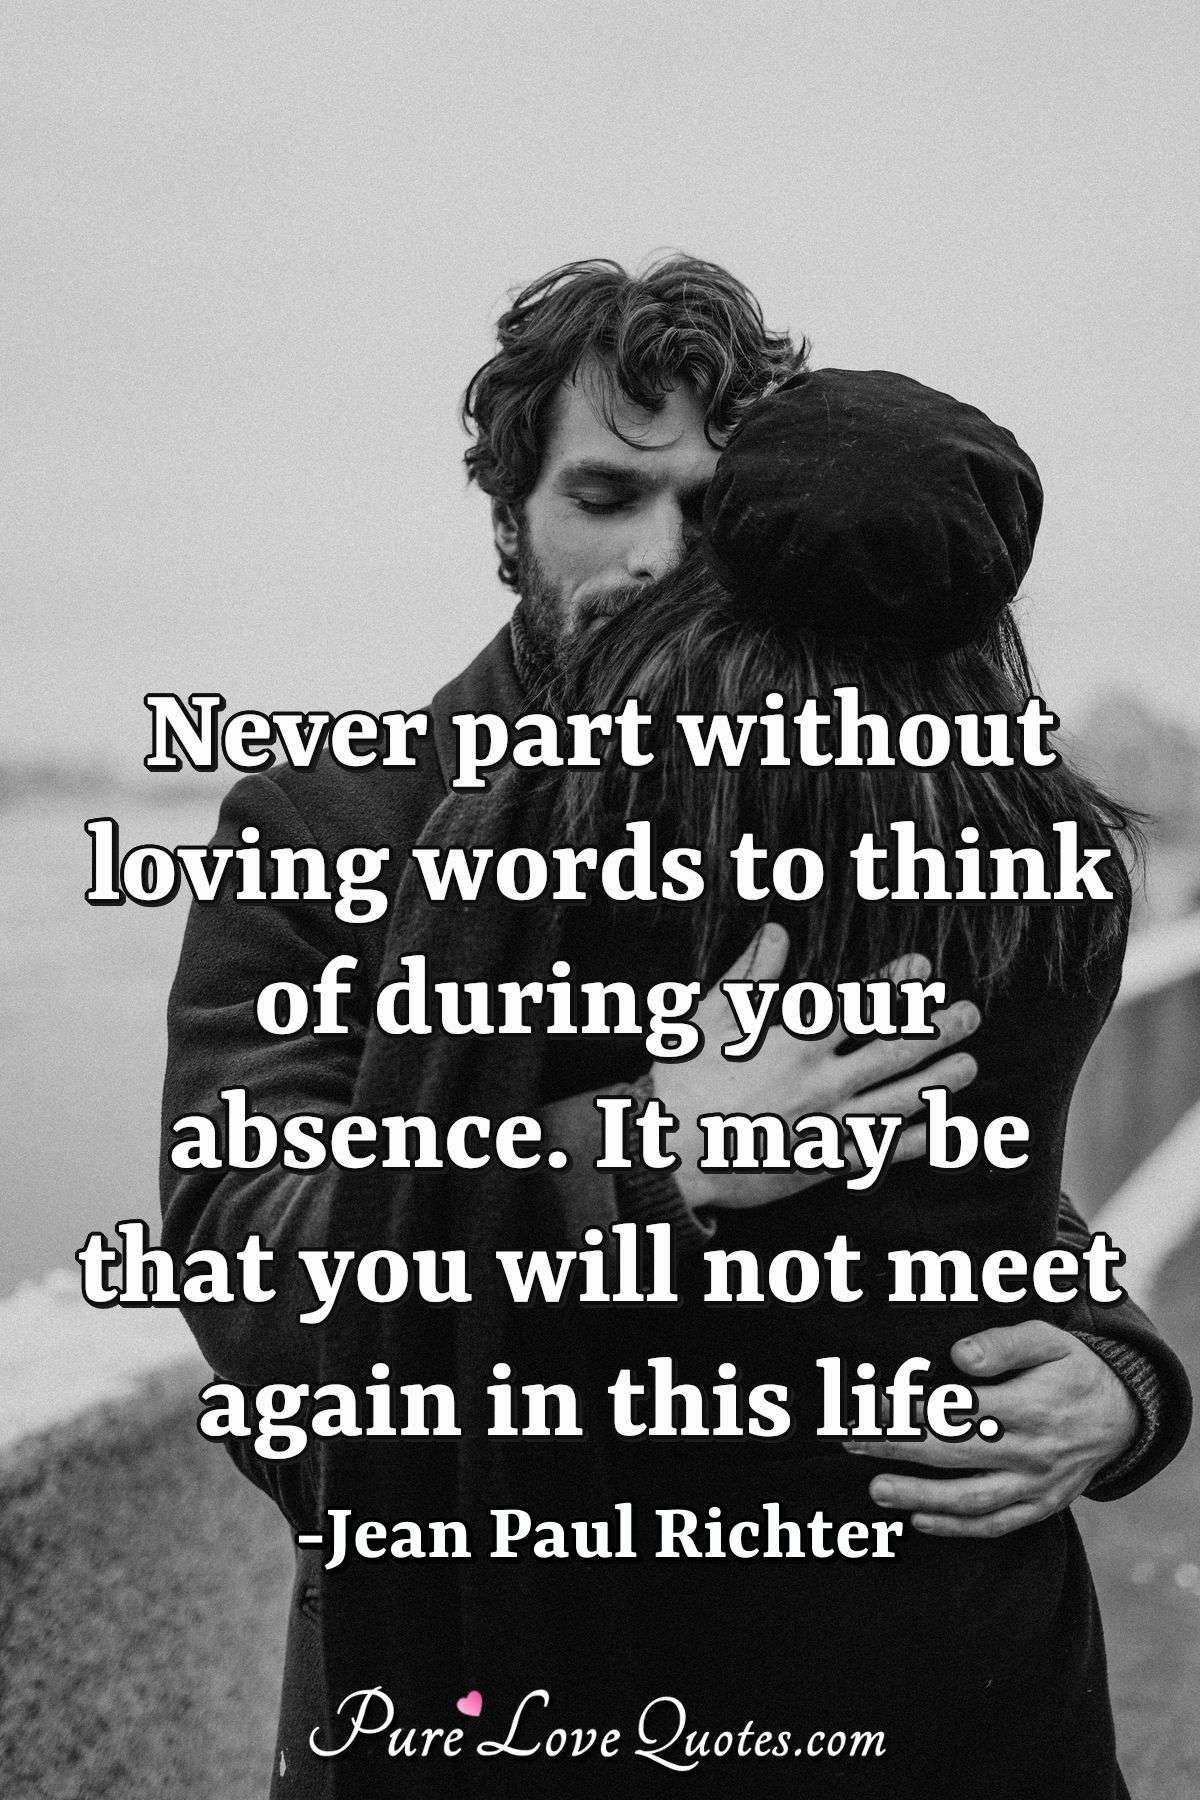 Never part without loving words to think of during your absence. It may be that you will not meet again in this life. - Jean Paul Richter